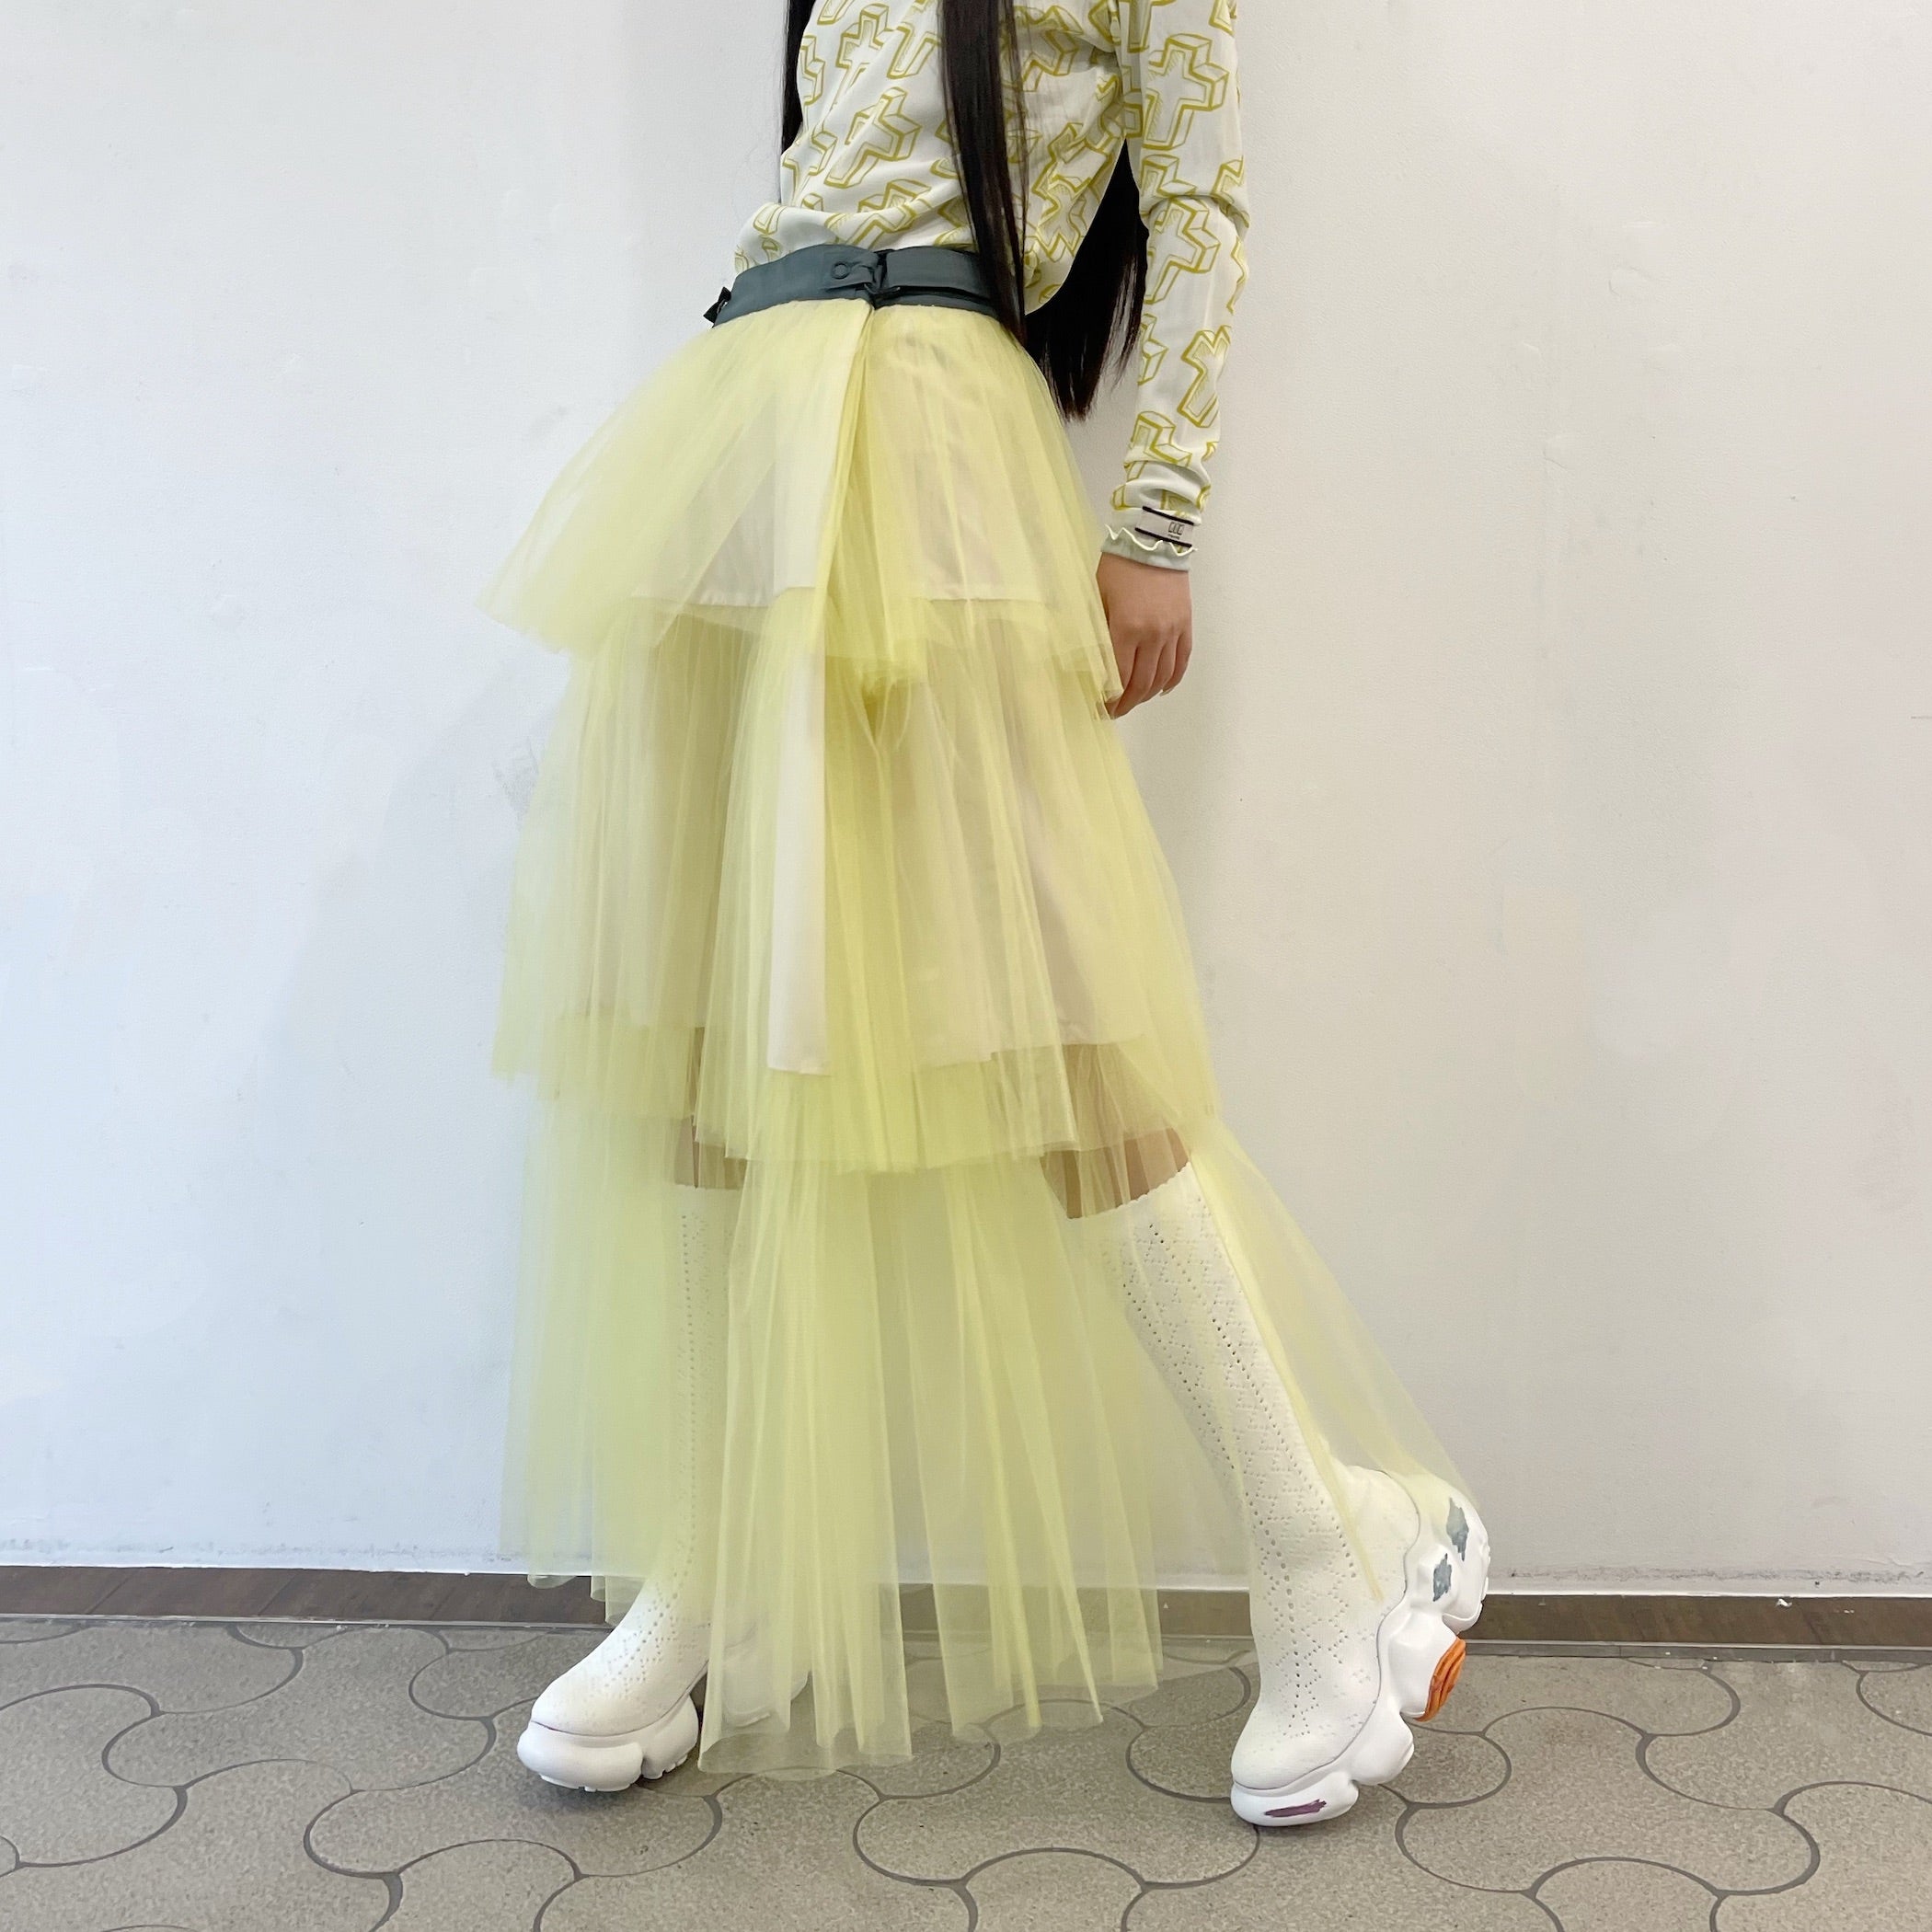 L'Appartement Tulle Skirt チュールスカート ブラウン